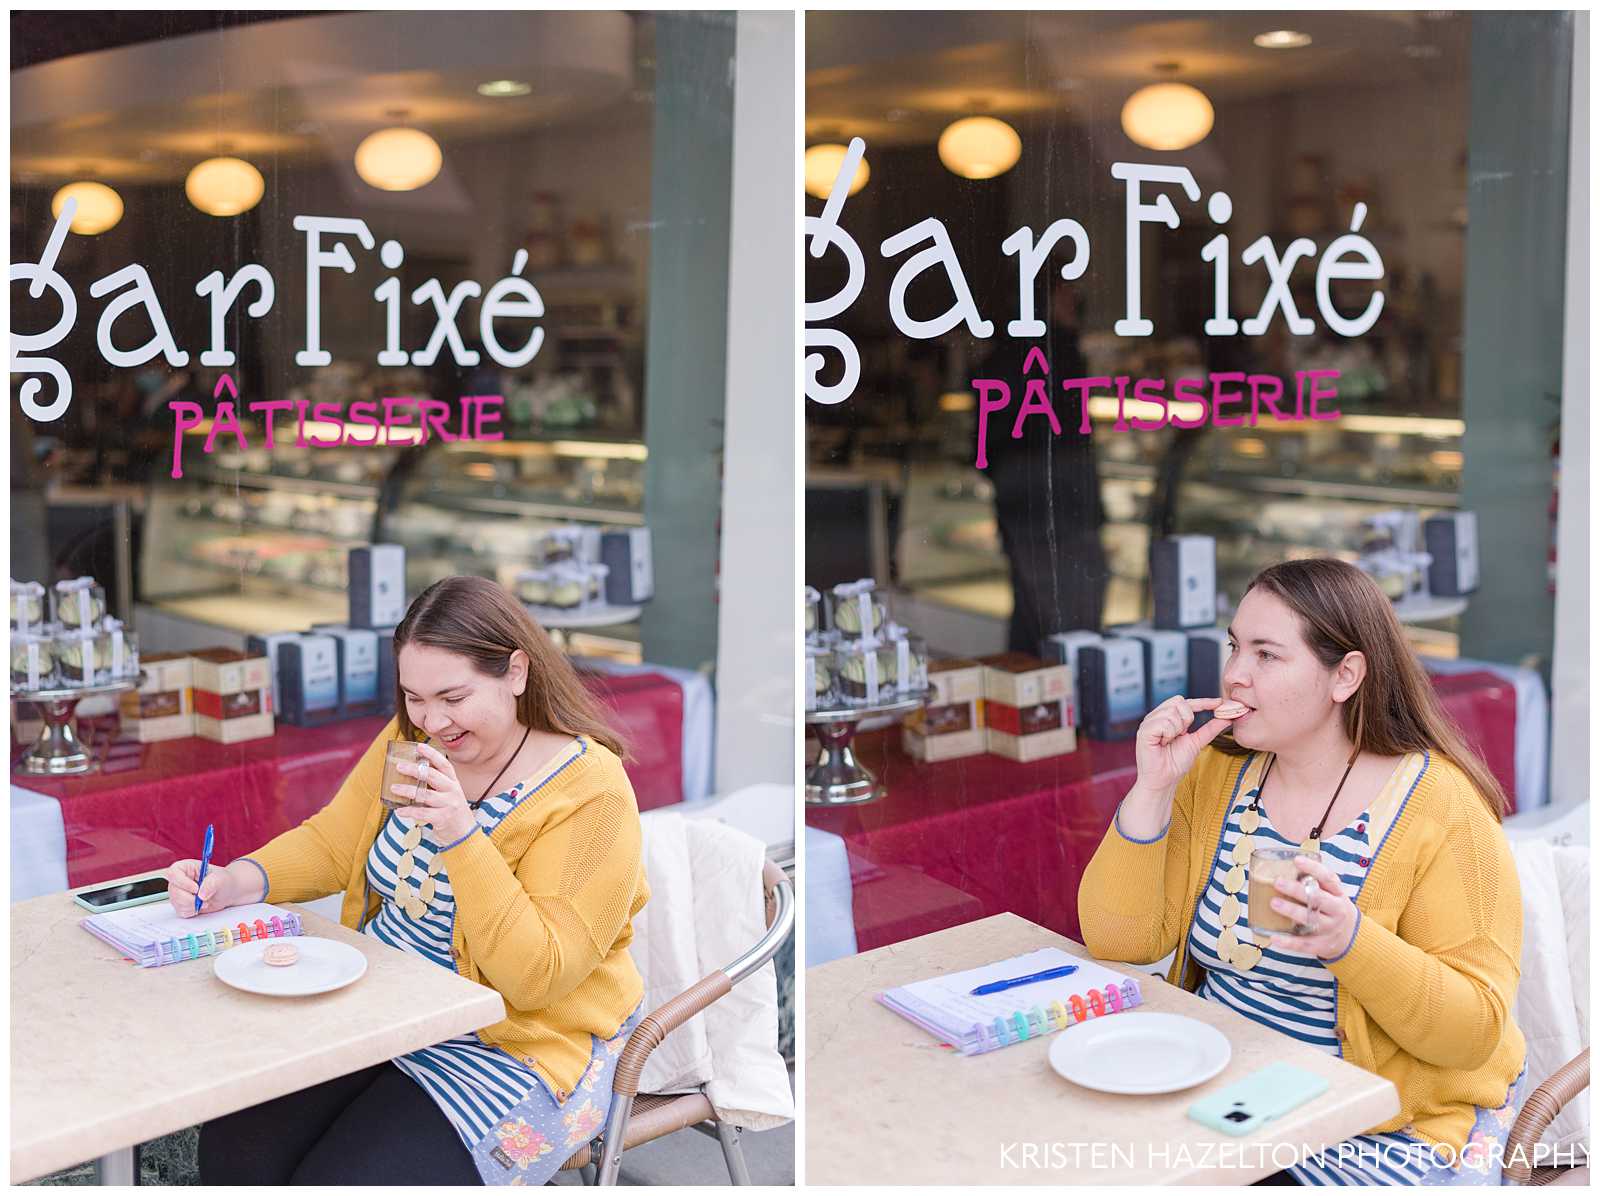 Woman in yellow cardigan drinking a coffee and eating a macaron at a patisserie